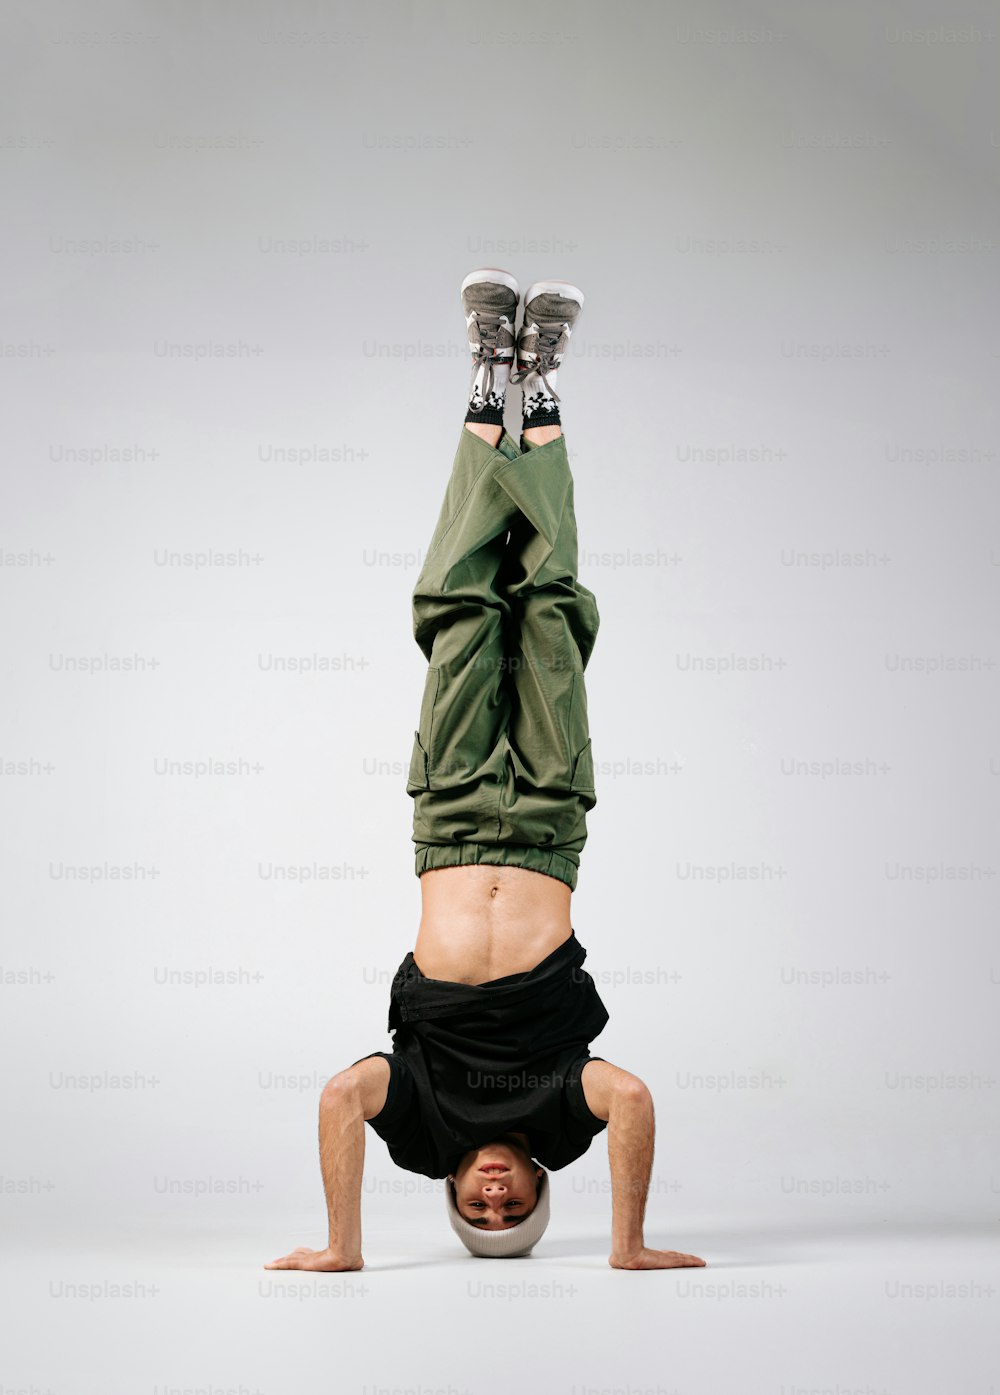 a man doing a handstand on his head